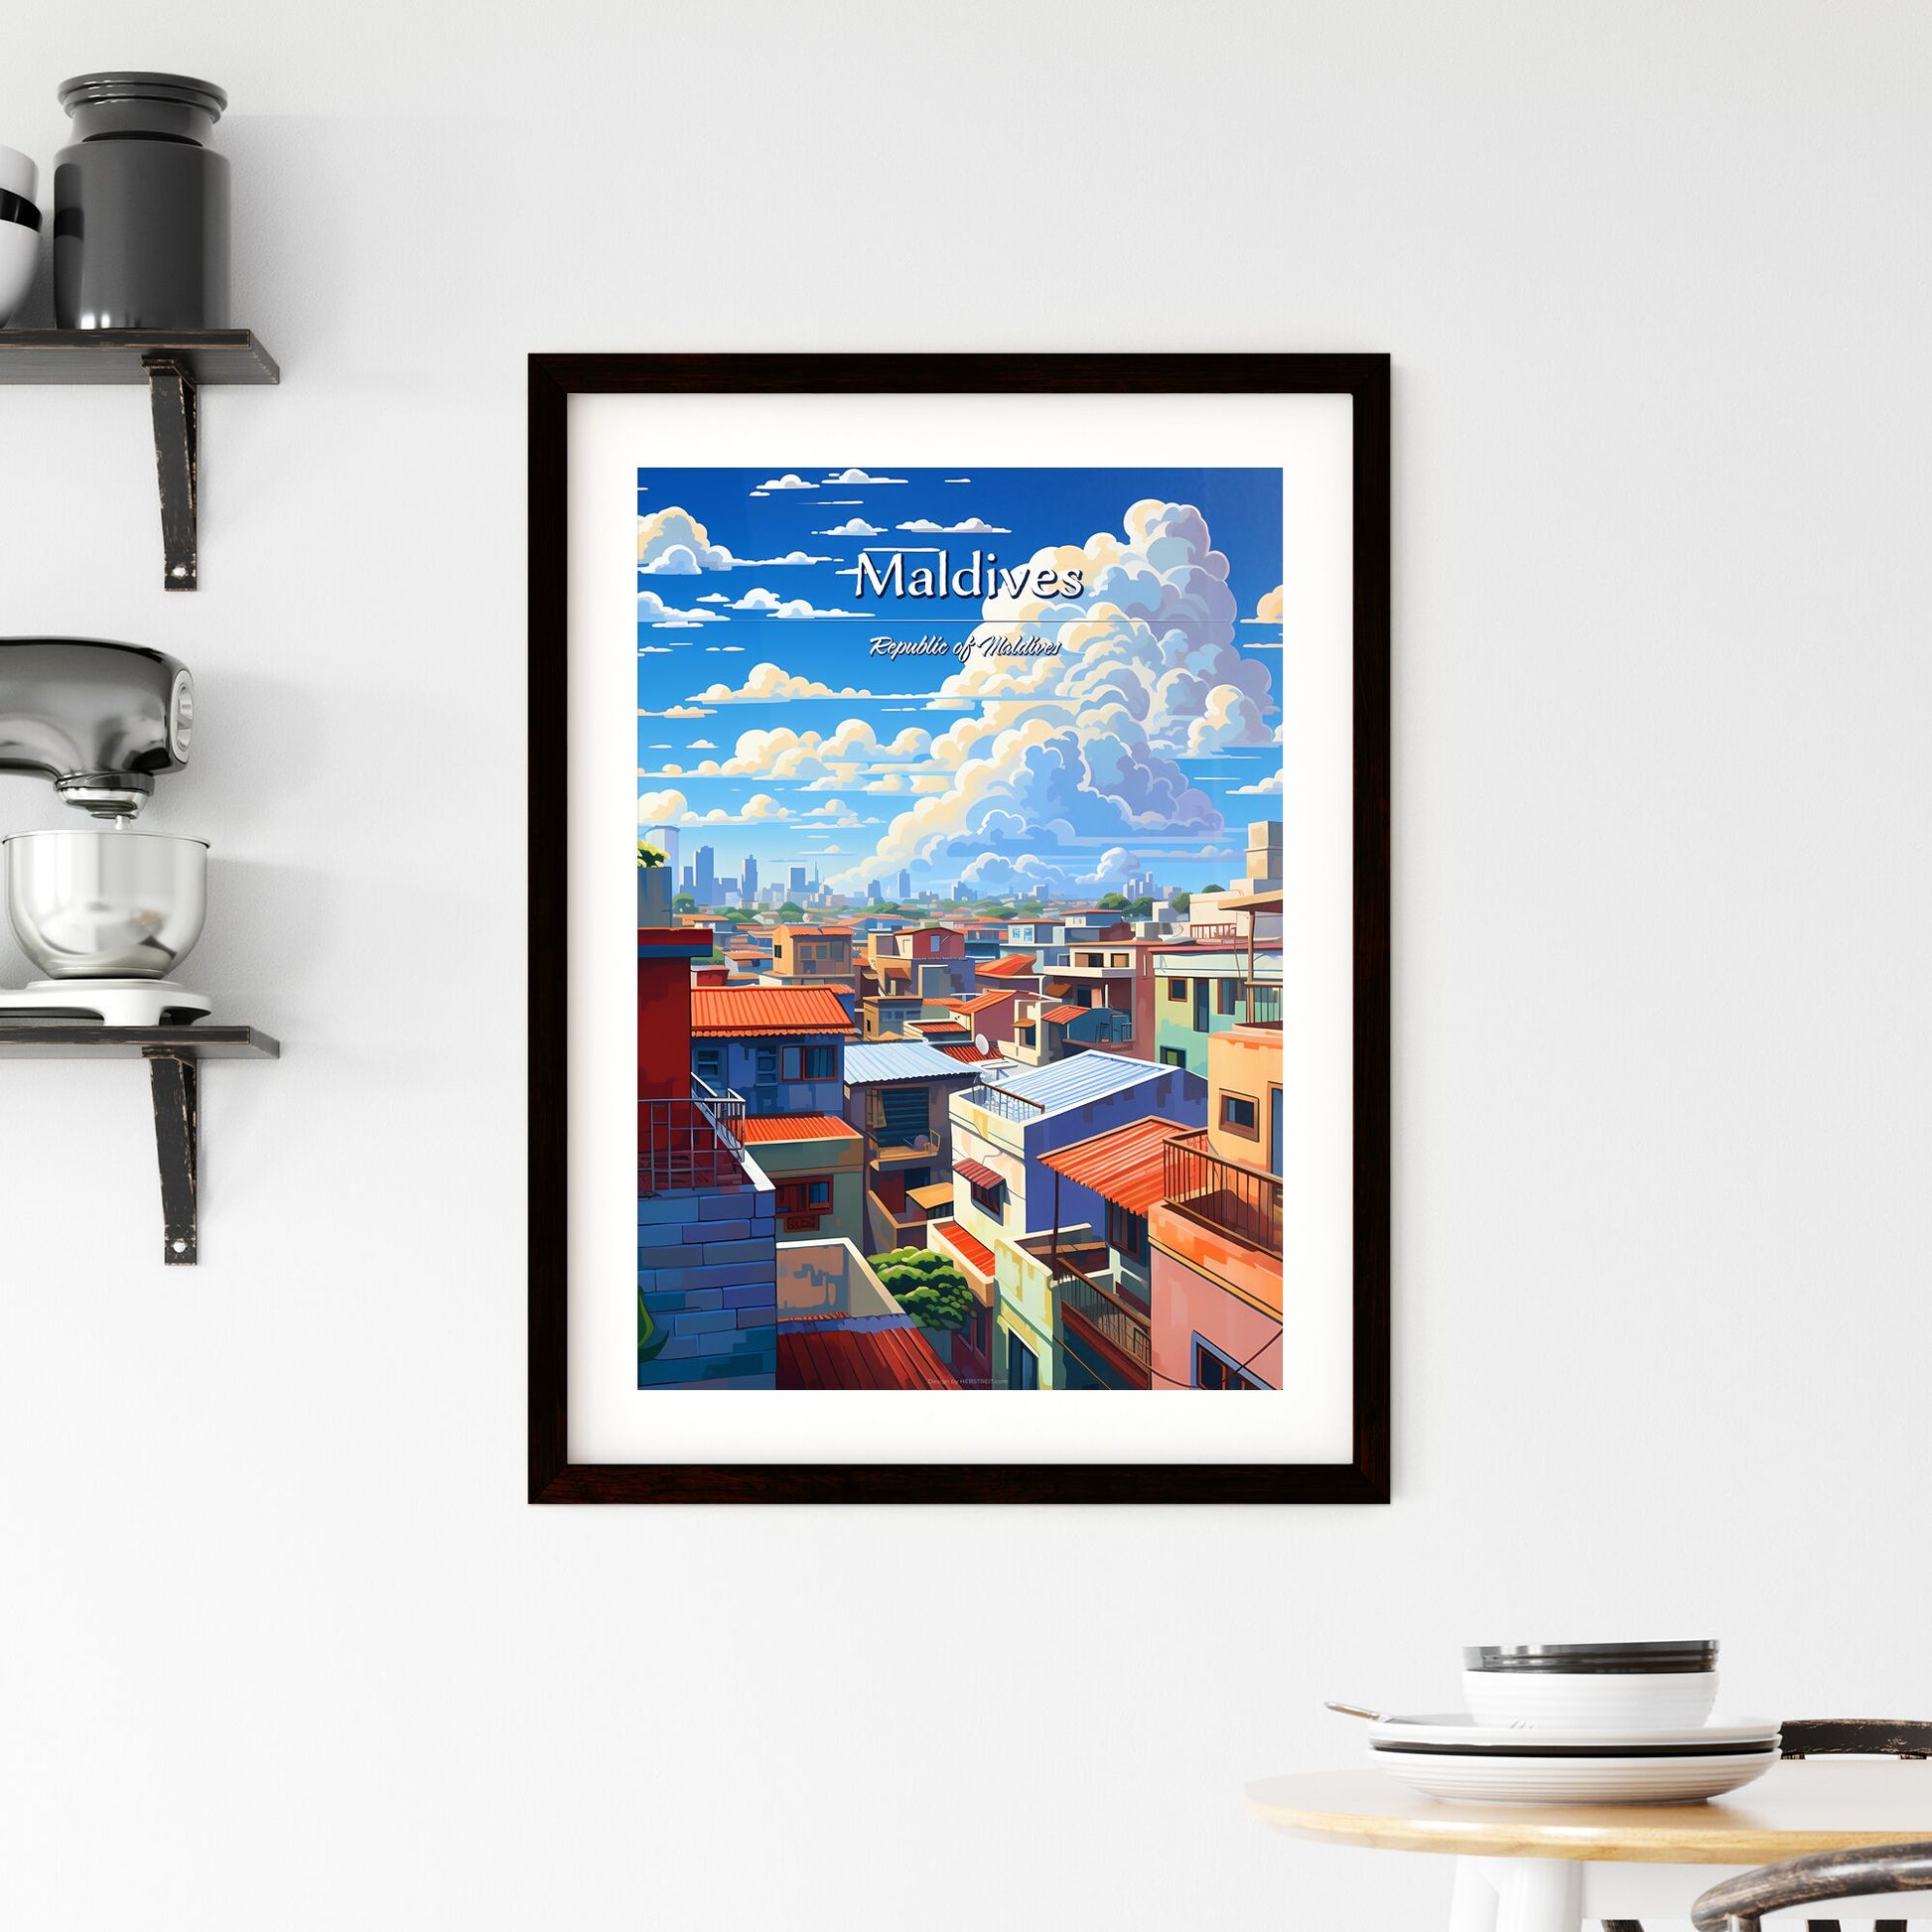 On the roofs of Maldives, Republic of Maldives - Art print of a city with many buildings and clouds in the sky Default Title